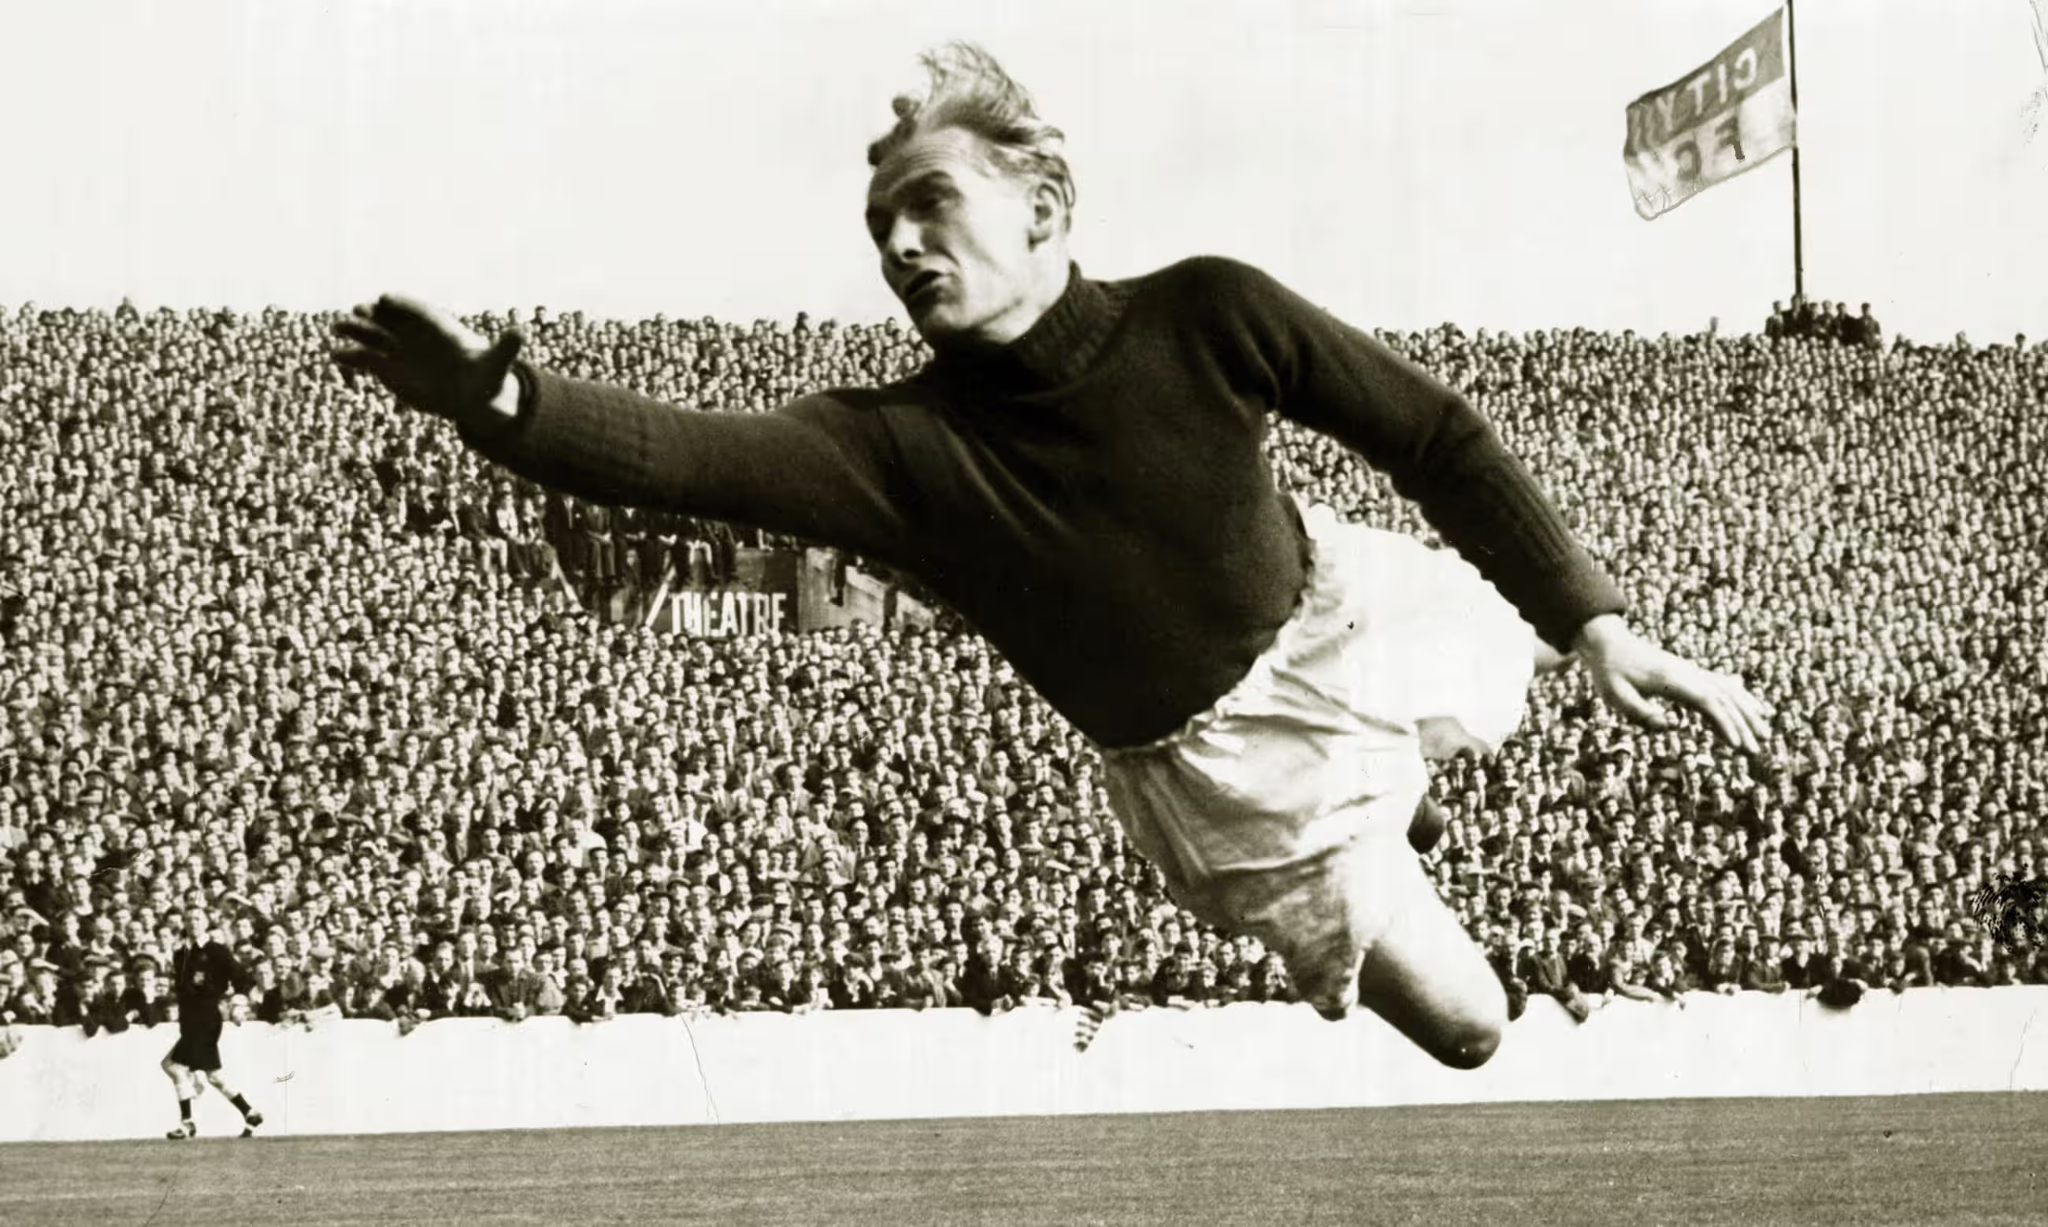 Goalkeeper Bert Trautmann was paratrooper before joining City. He flew at Citizens' goal too.